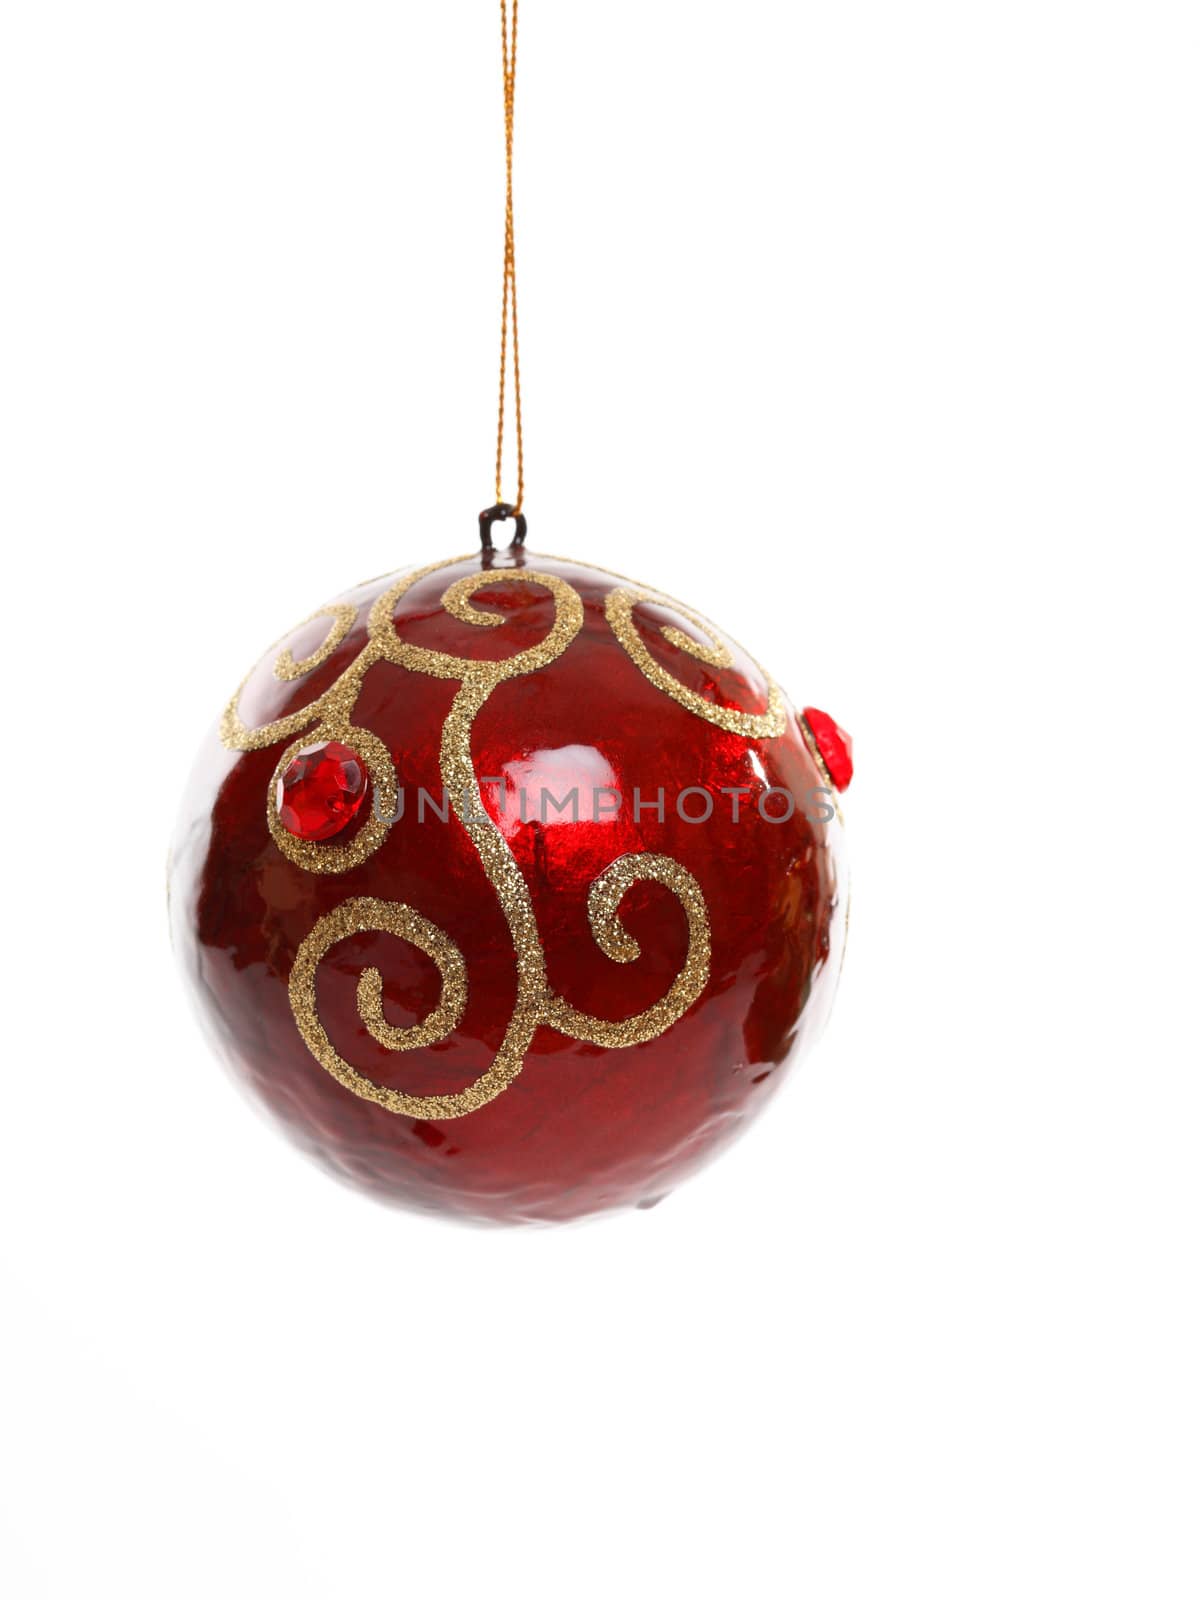 Red Christmas ball ornament decorated with beads and gold glitter swirls.